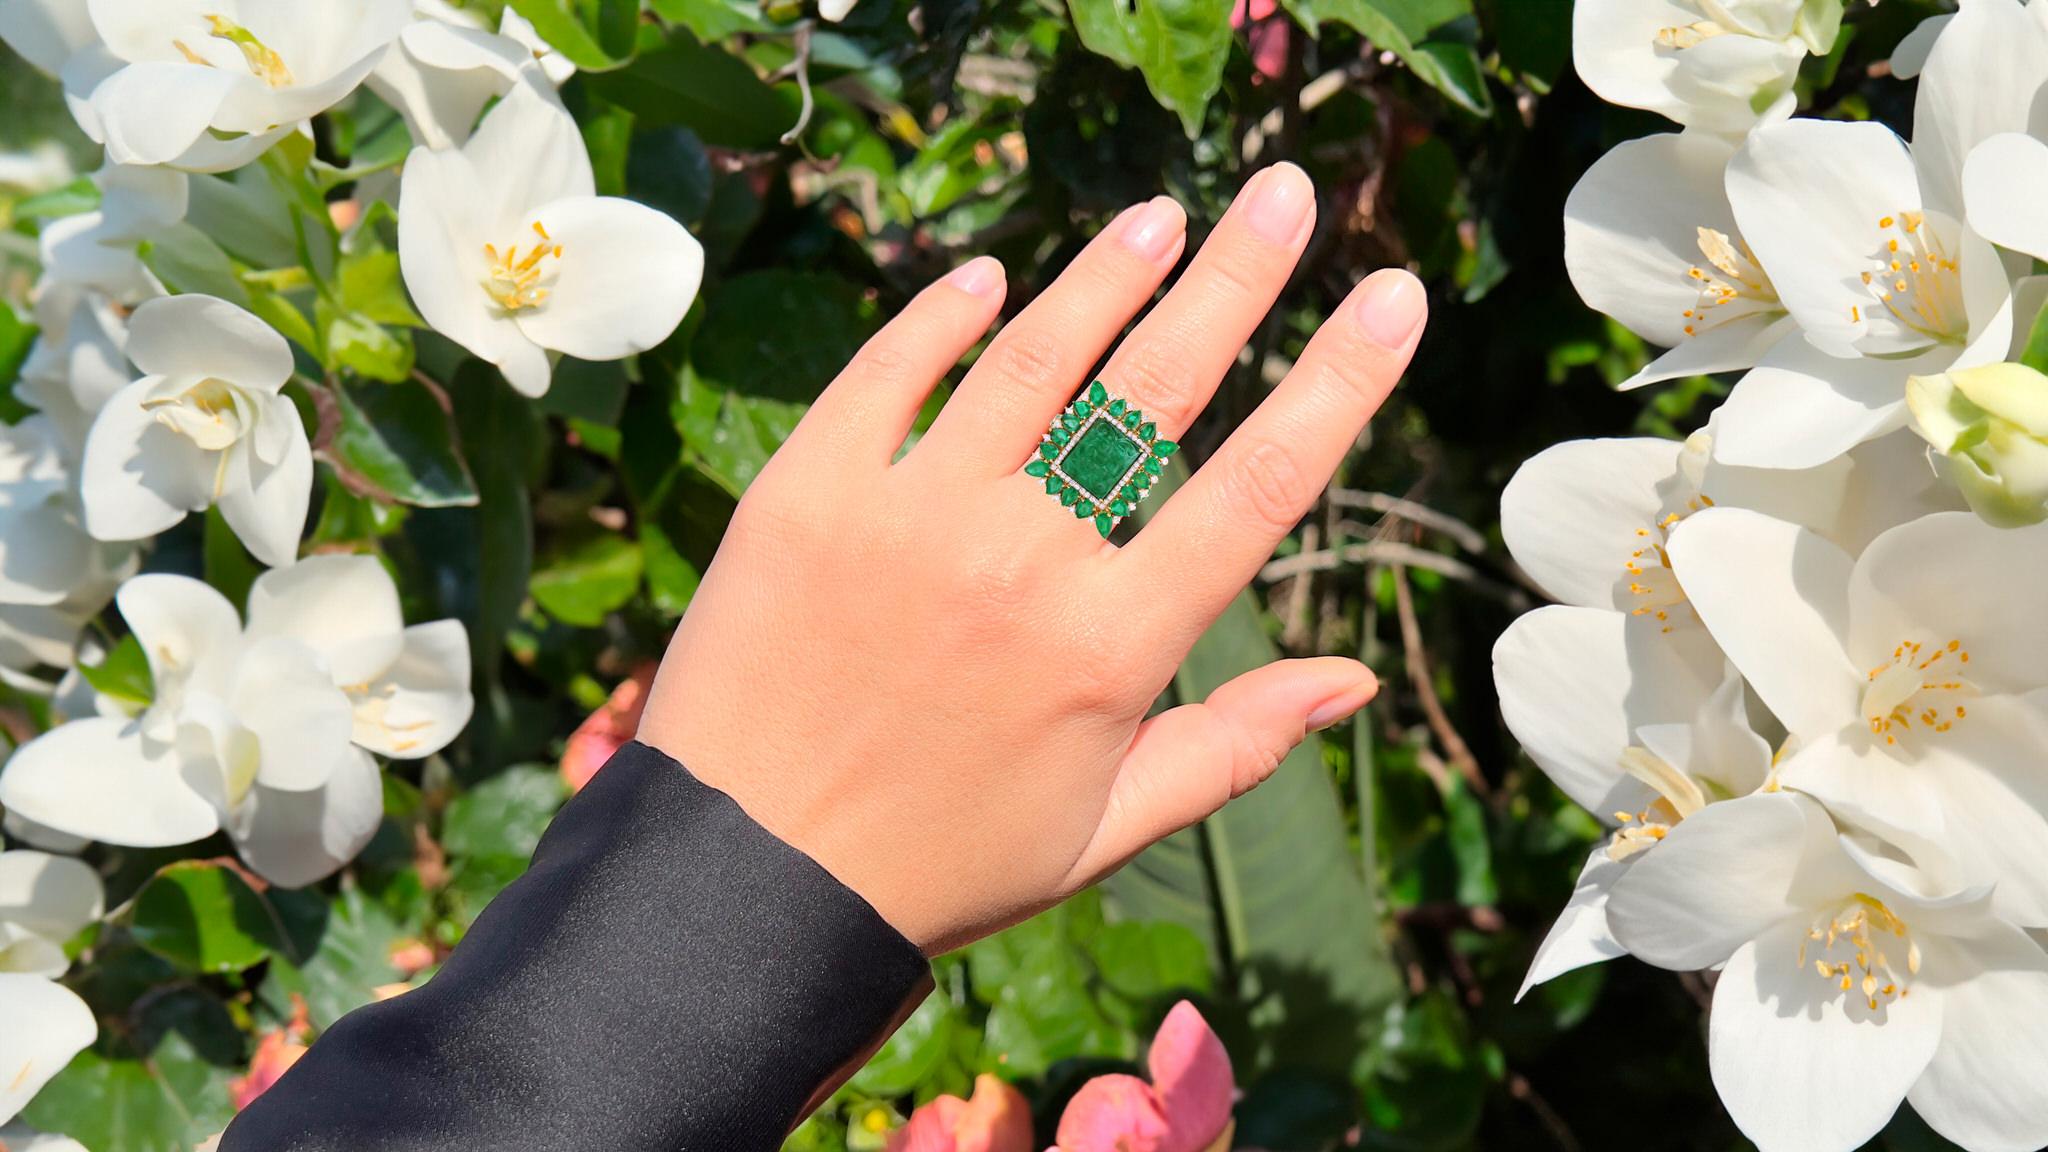 It comes with the Gemological Appraisal by GIA GG/AJP
All Gemstones are Natural
Emeralds = 10 Carats
Diamonds = 0.85 Carats
Metal: 18K Yellow Gold
Ring Size: 7* US
*It can be resized complimentary